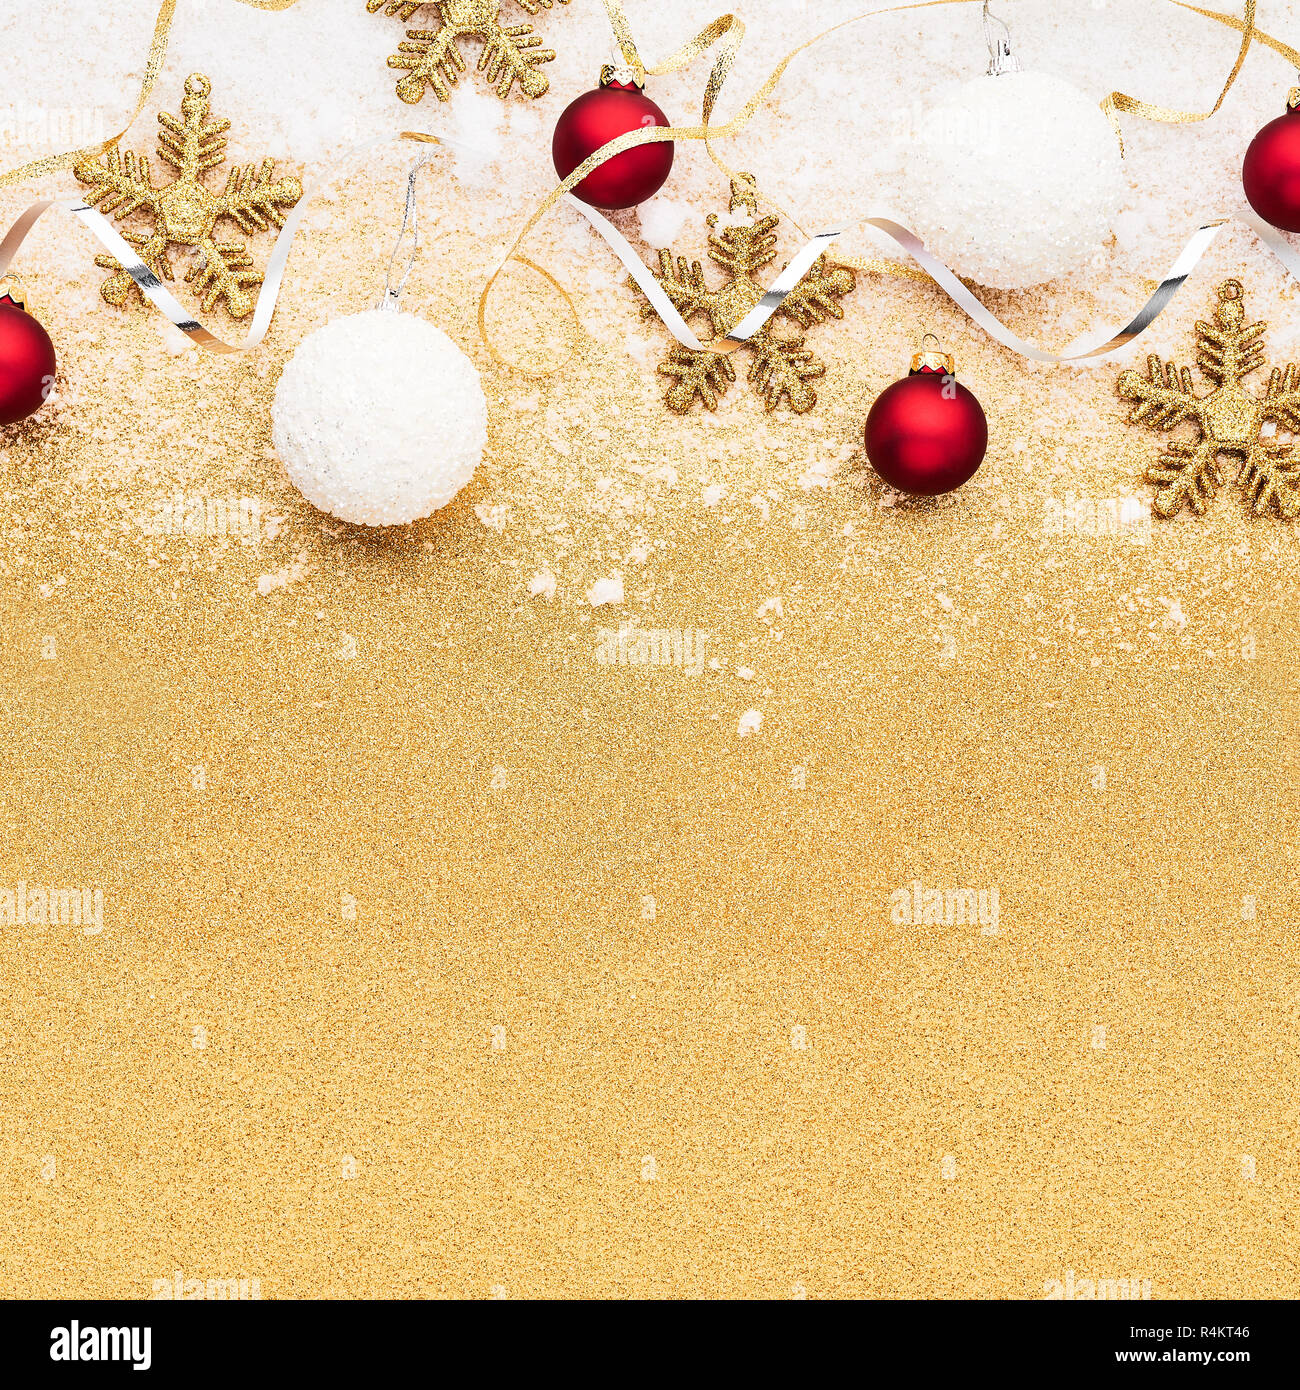 Beautiful christmas red, white and gold deco baubles with powdery snow on golden glitter background. Flat lay design. Copy Space. Square crop. Stock Photo